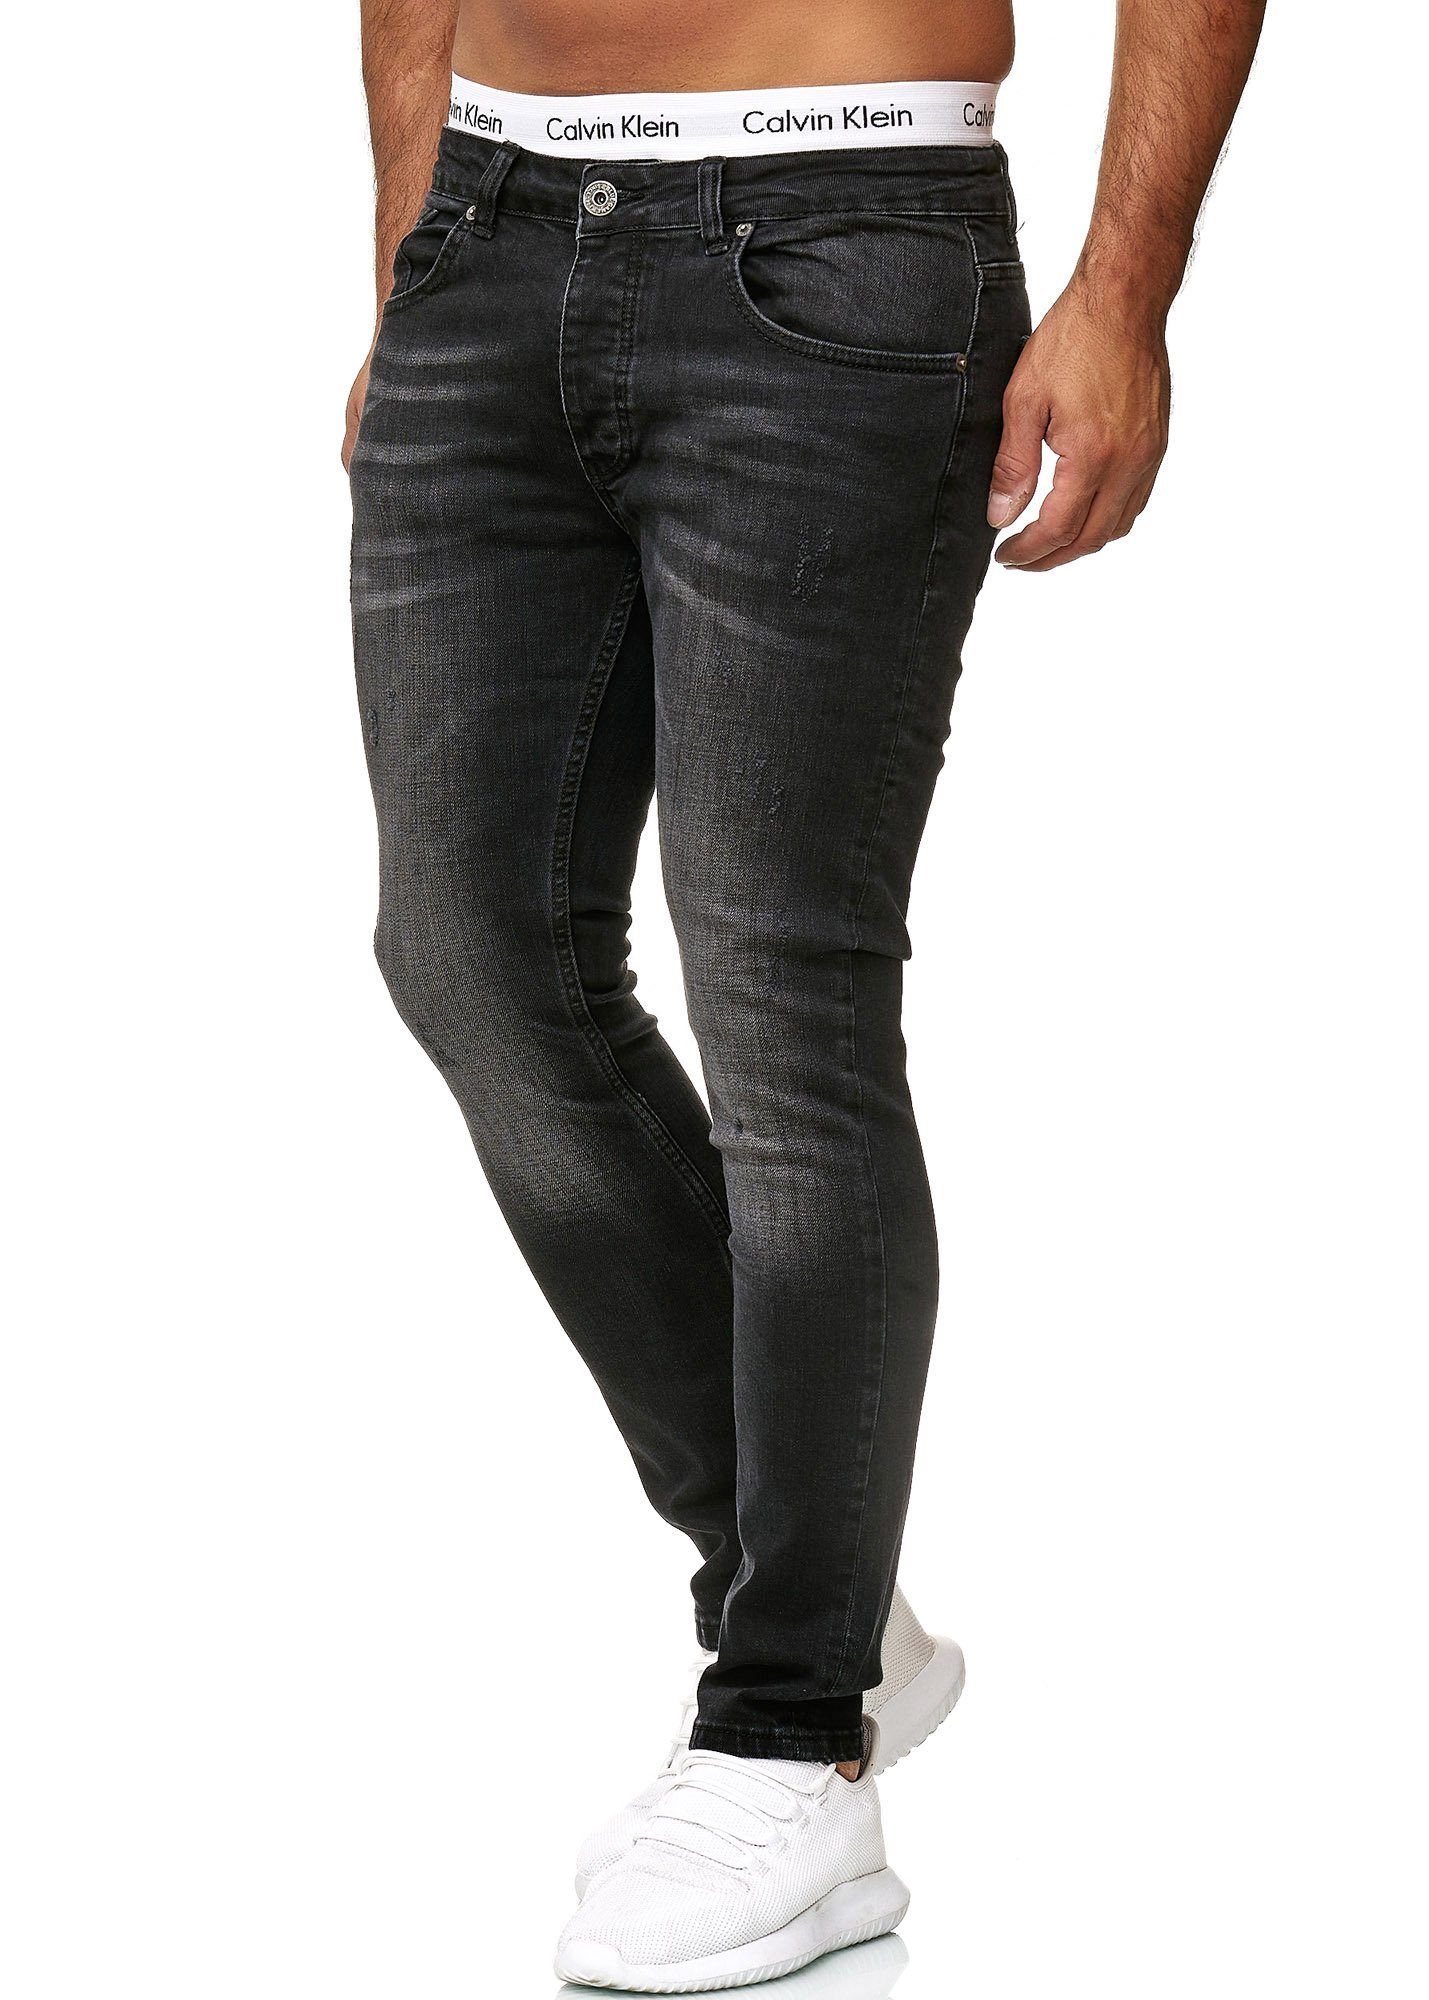 Black Designerjeans (Jeanshose OneRedox 1-tlg) 604 600JS Used Straight-Jeans Business Casual Dirty Freizeit Bootcut,